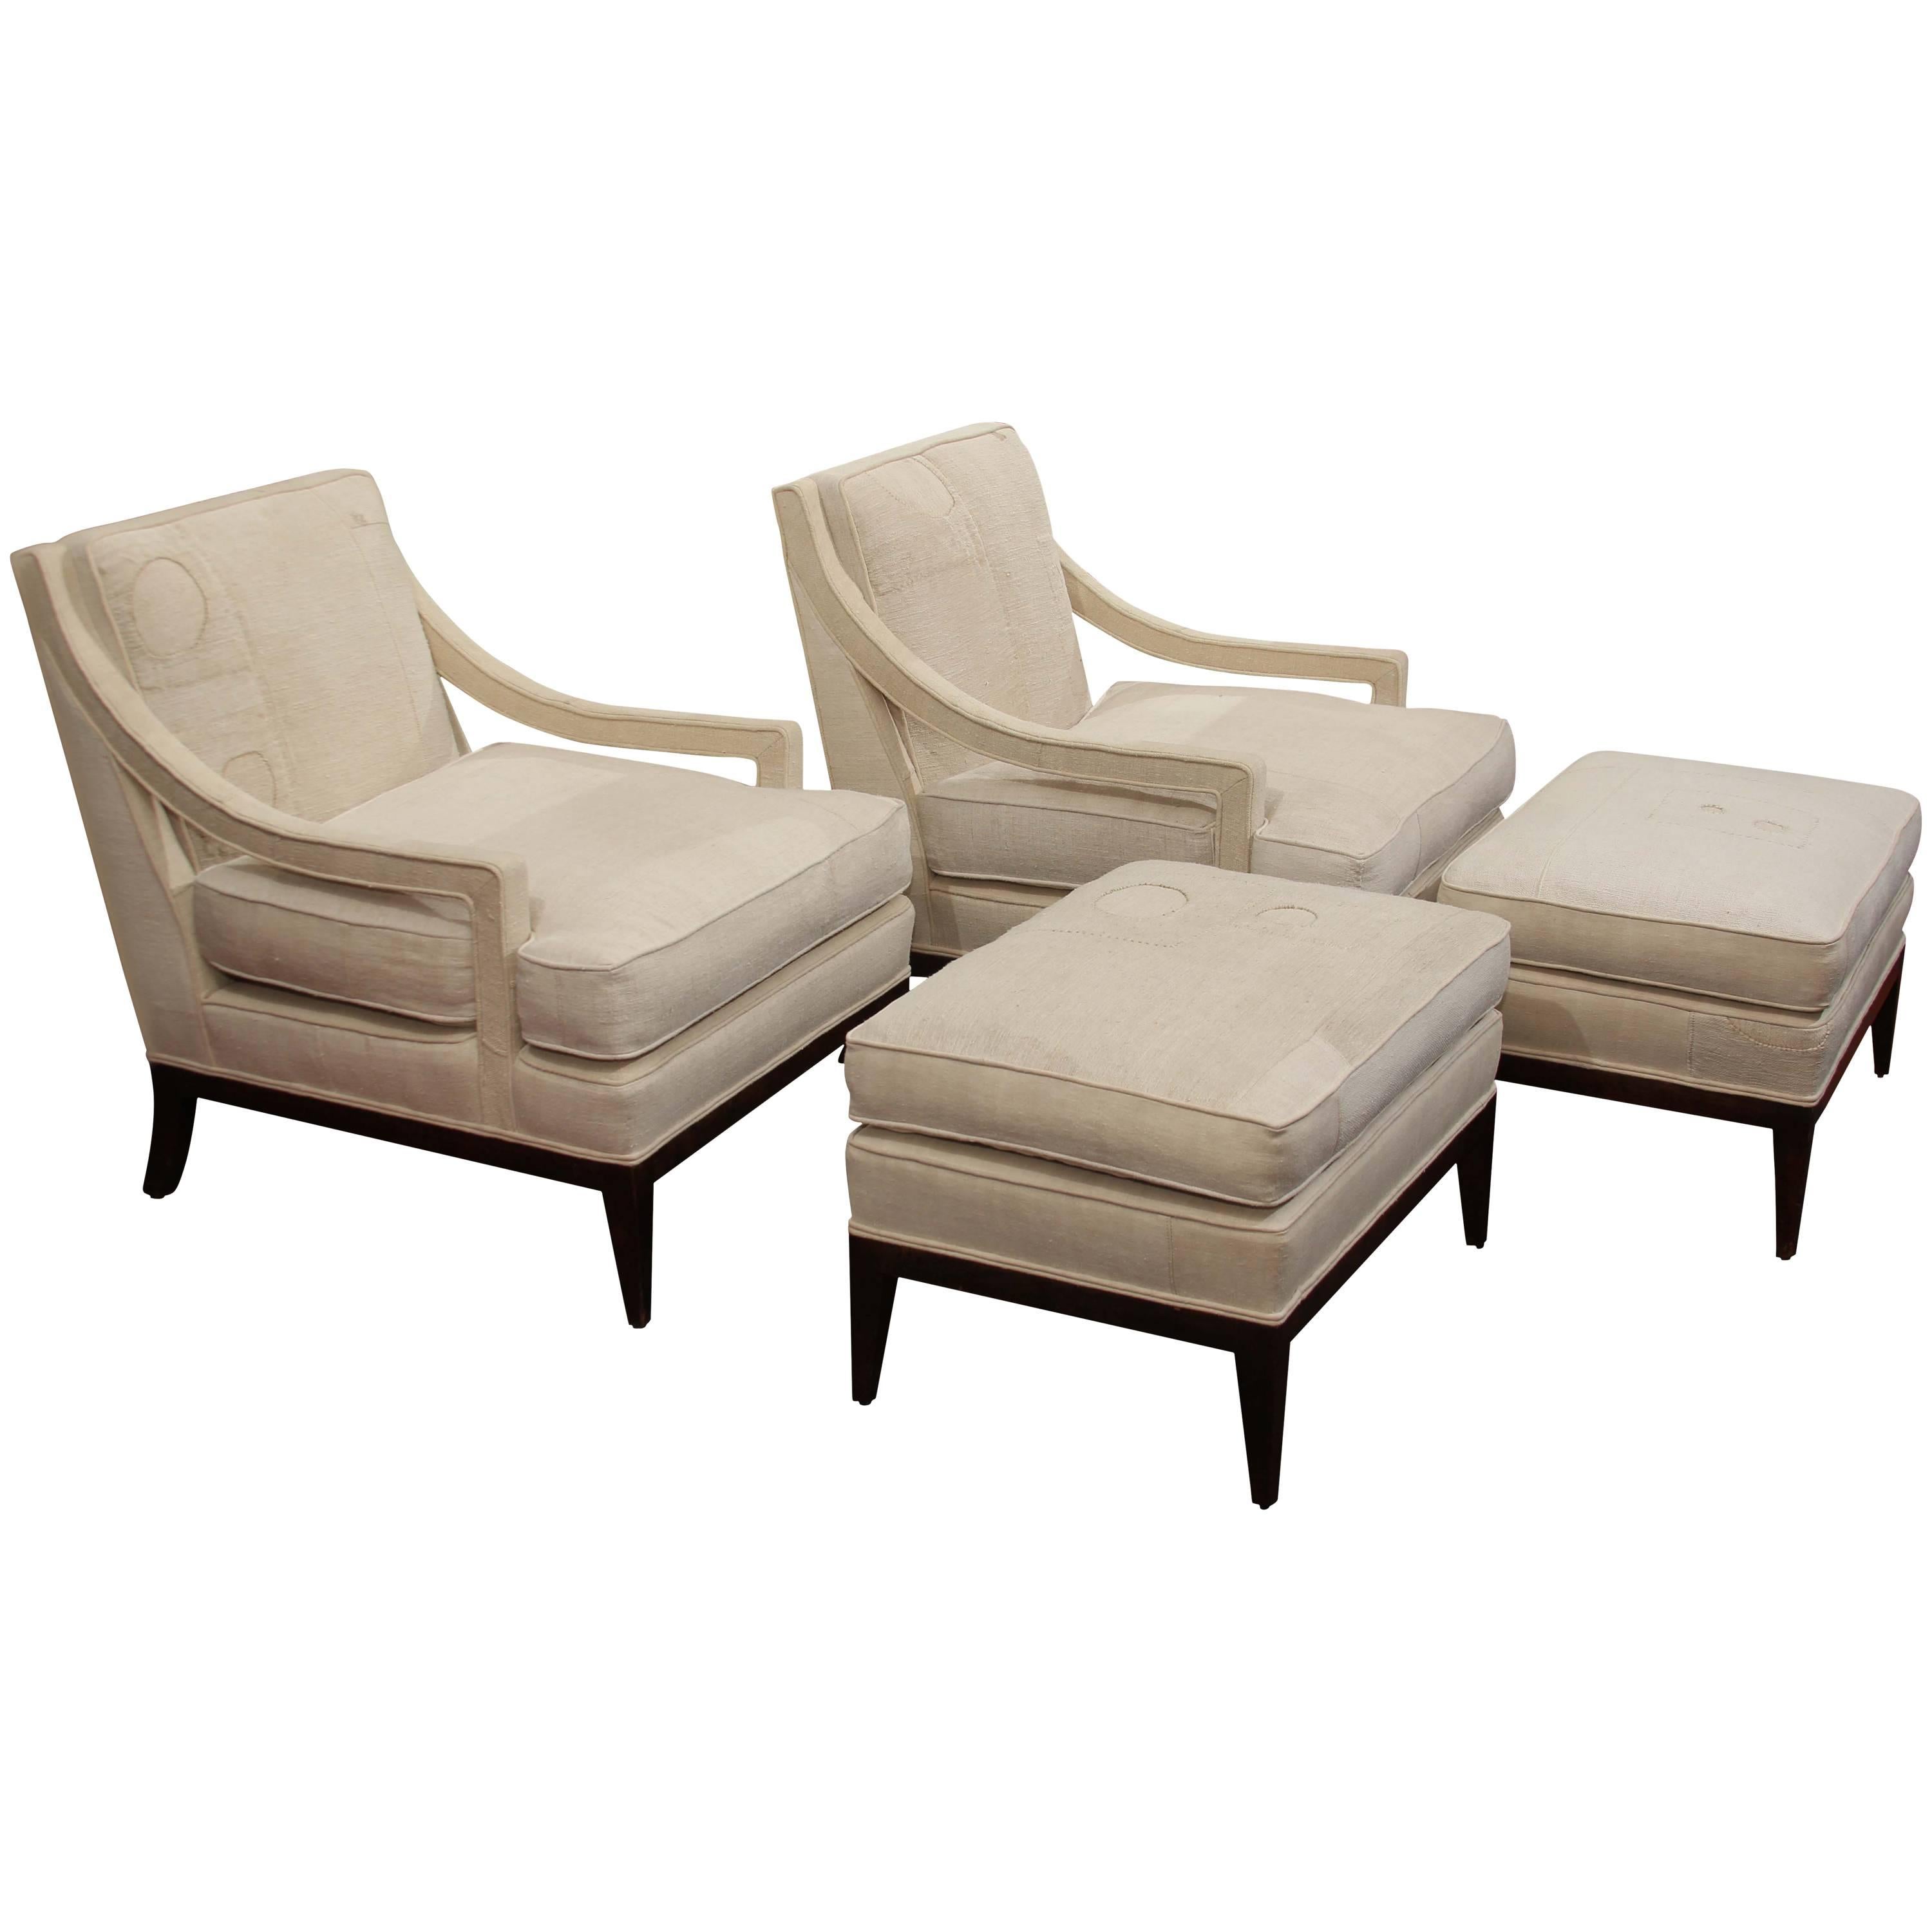 Pair of Mid-Century Chairs and Ottomans in Homespun